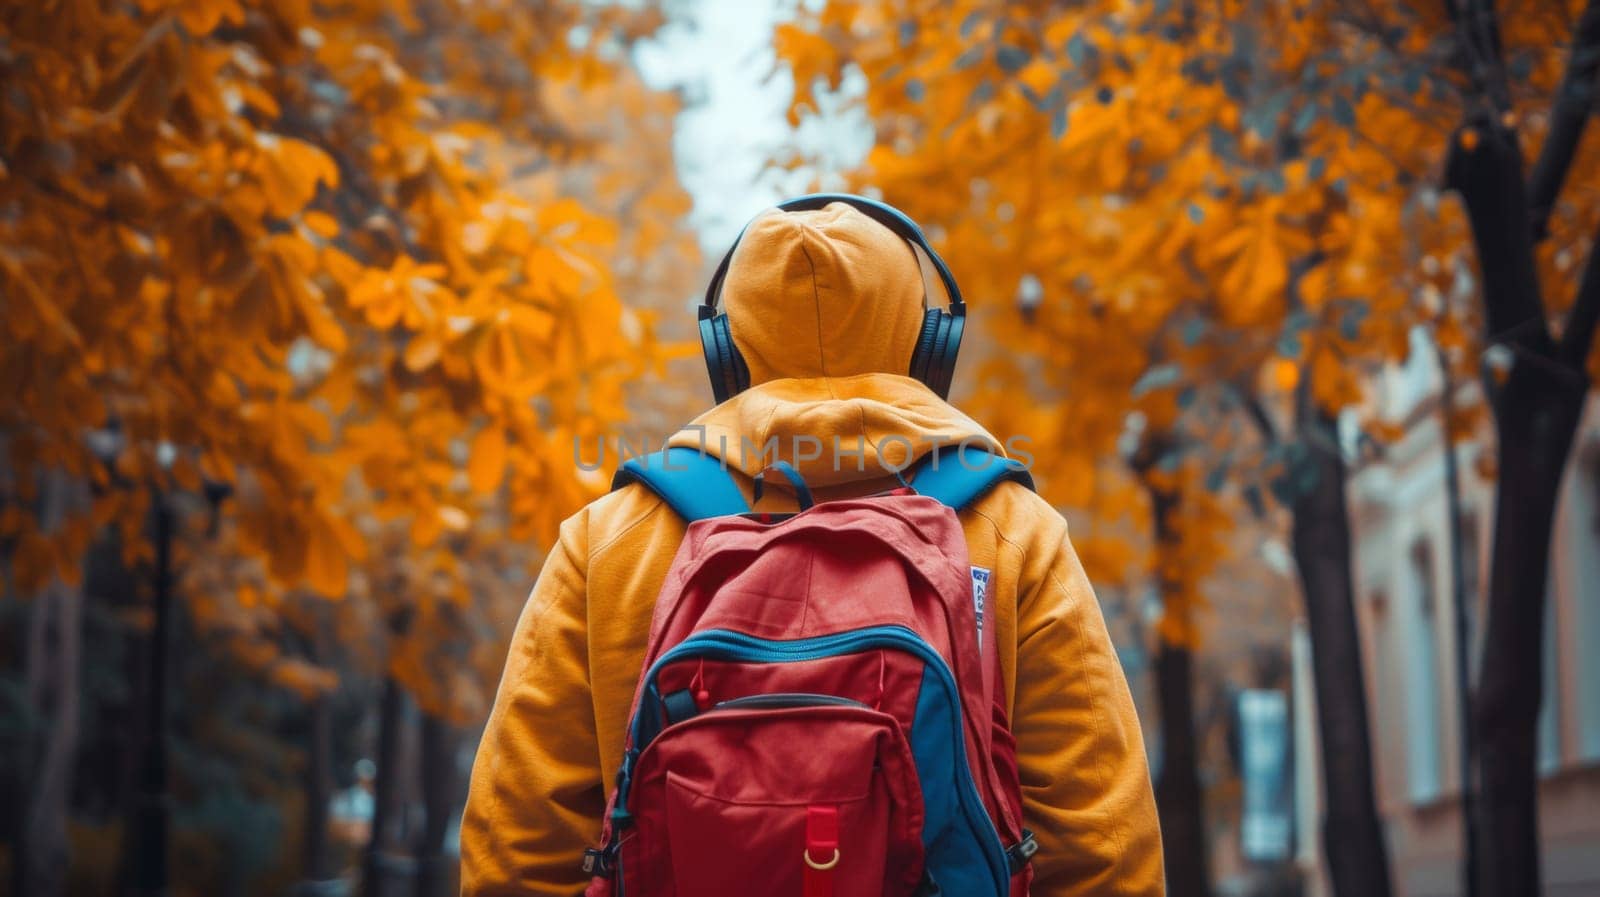 A person wearing a backpack and headphones walking down the street